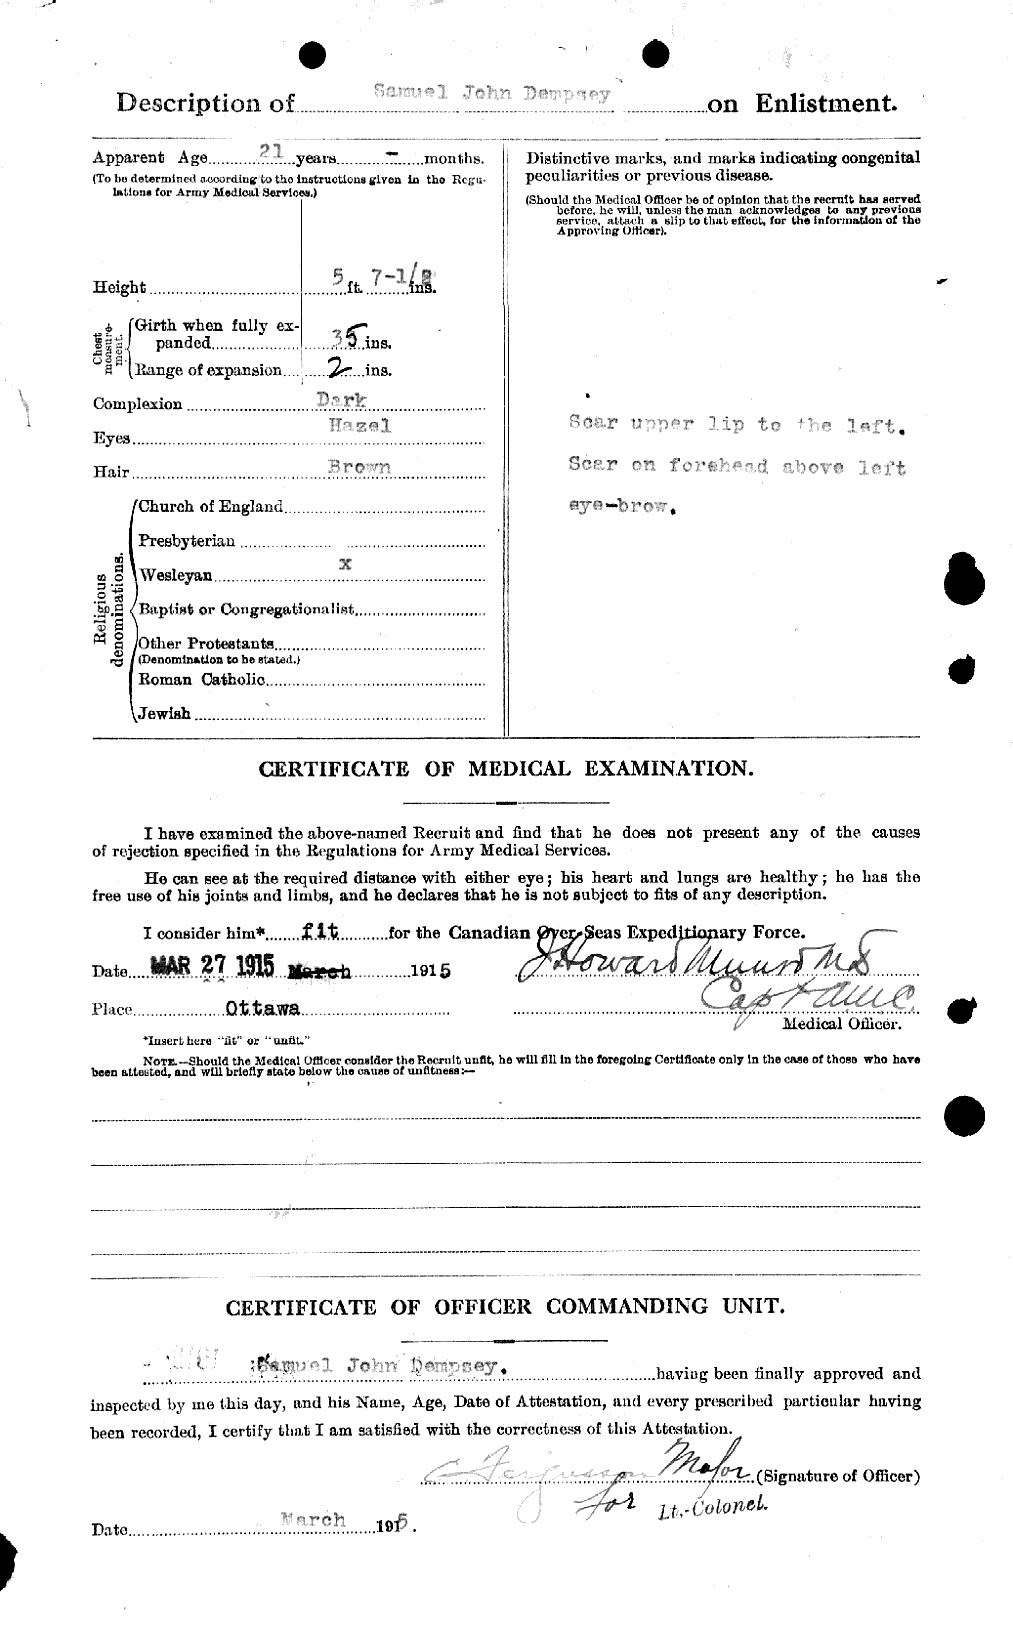 Personnel Records of the First World War - CEF 051286b